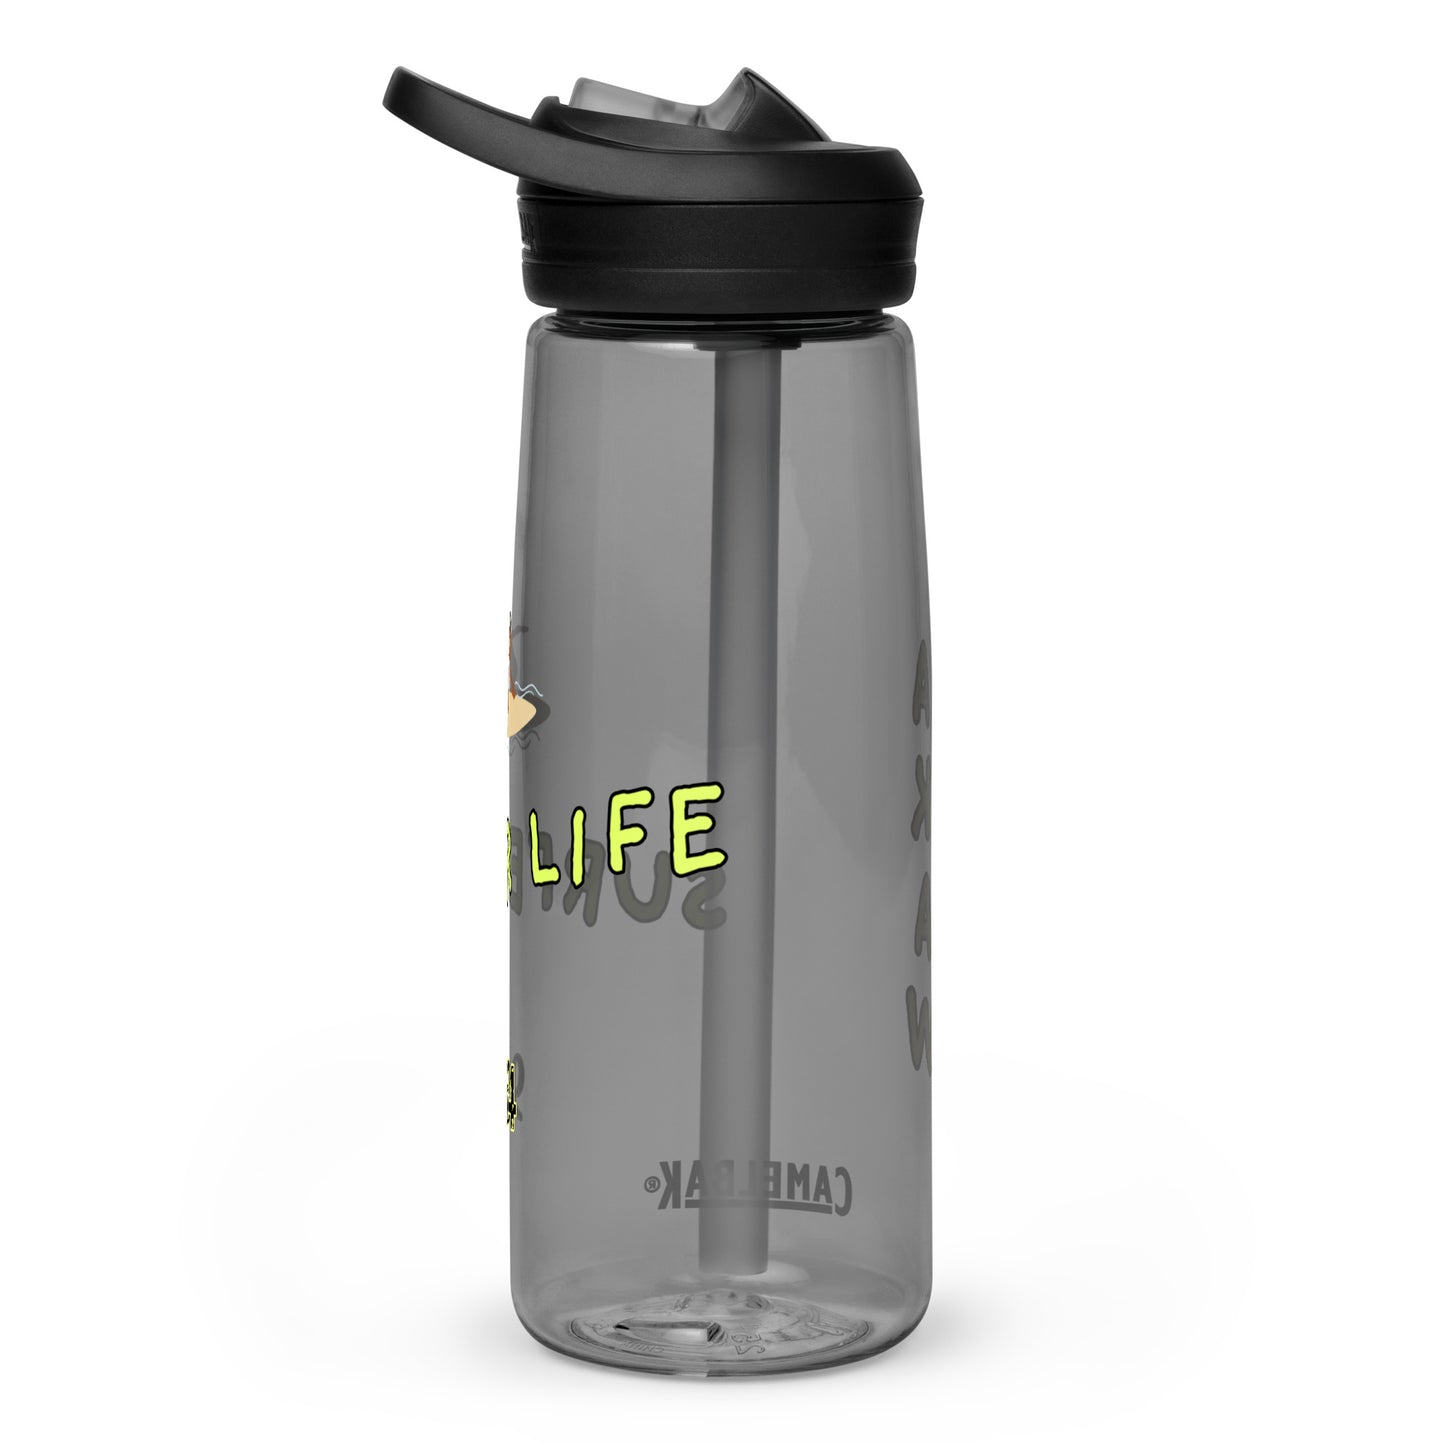 Surfer Life 954 Signature Sports water bottle